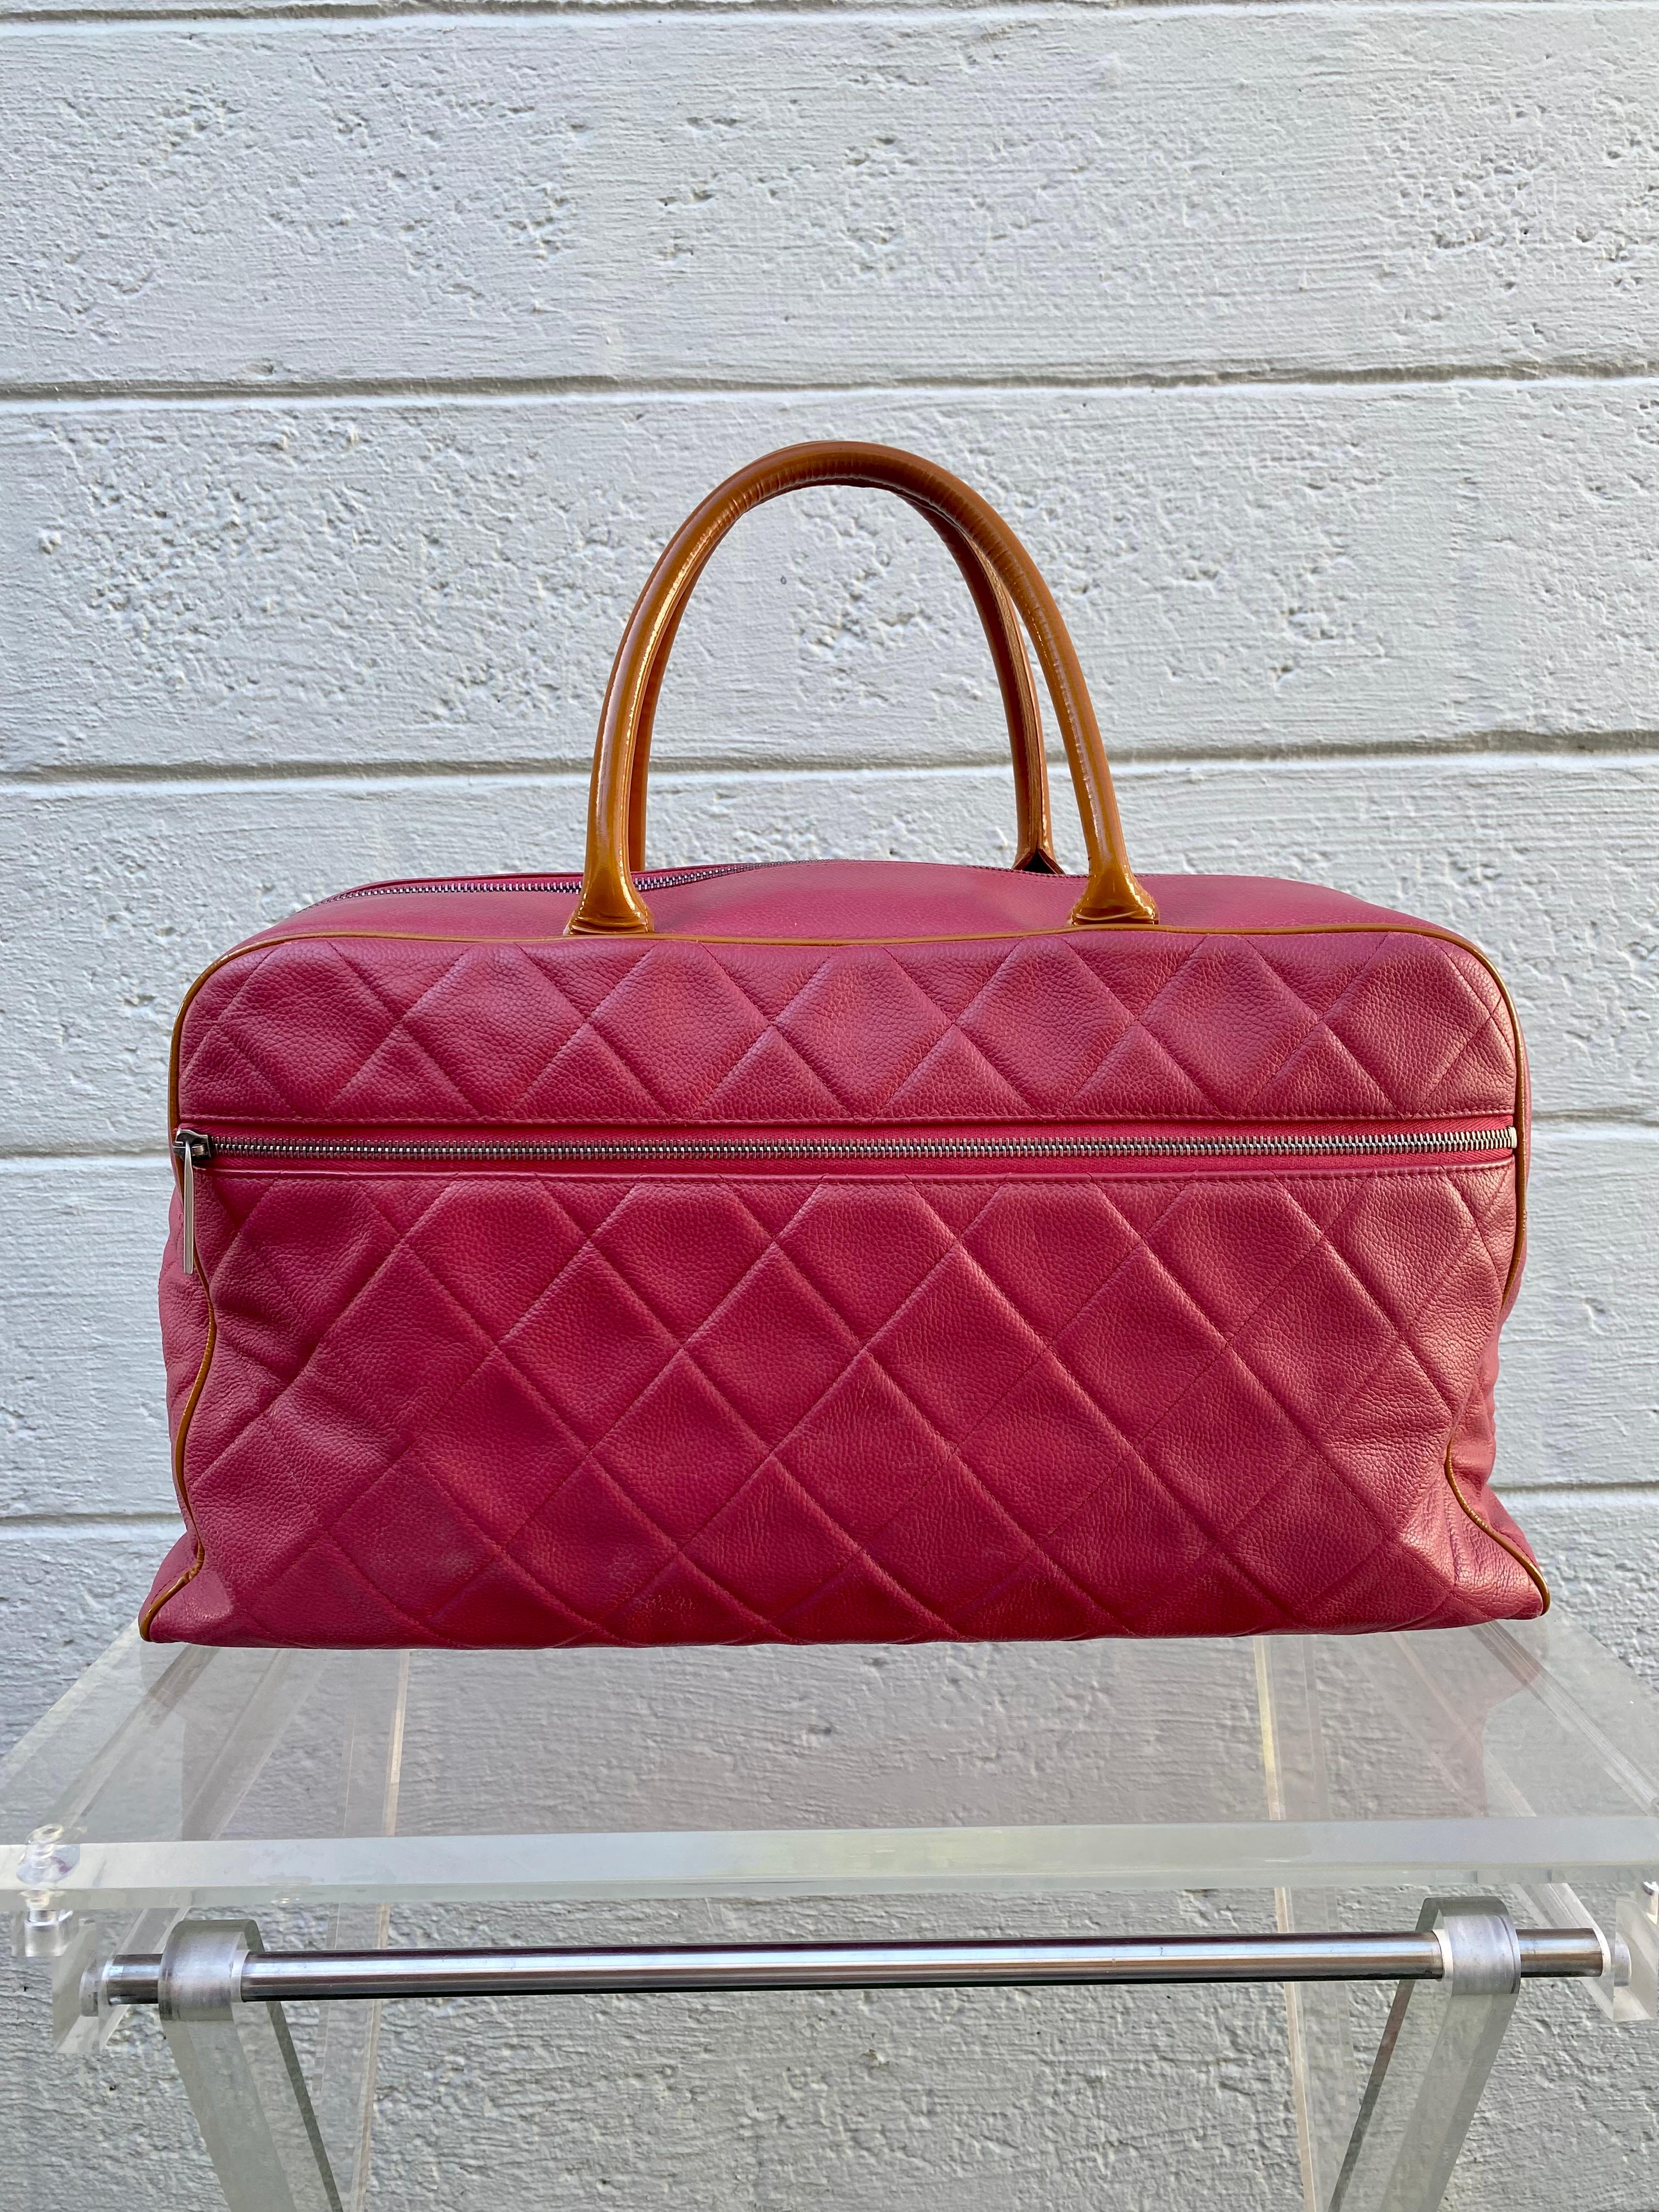 Chanel Rare Vintage Raspberry Pink Caviar Weekender Travel Duffle Shopper Bag In Excellent Condition For Sale In Fort Lauderdale, FL